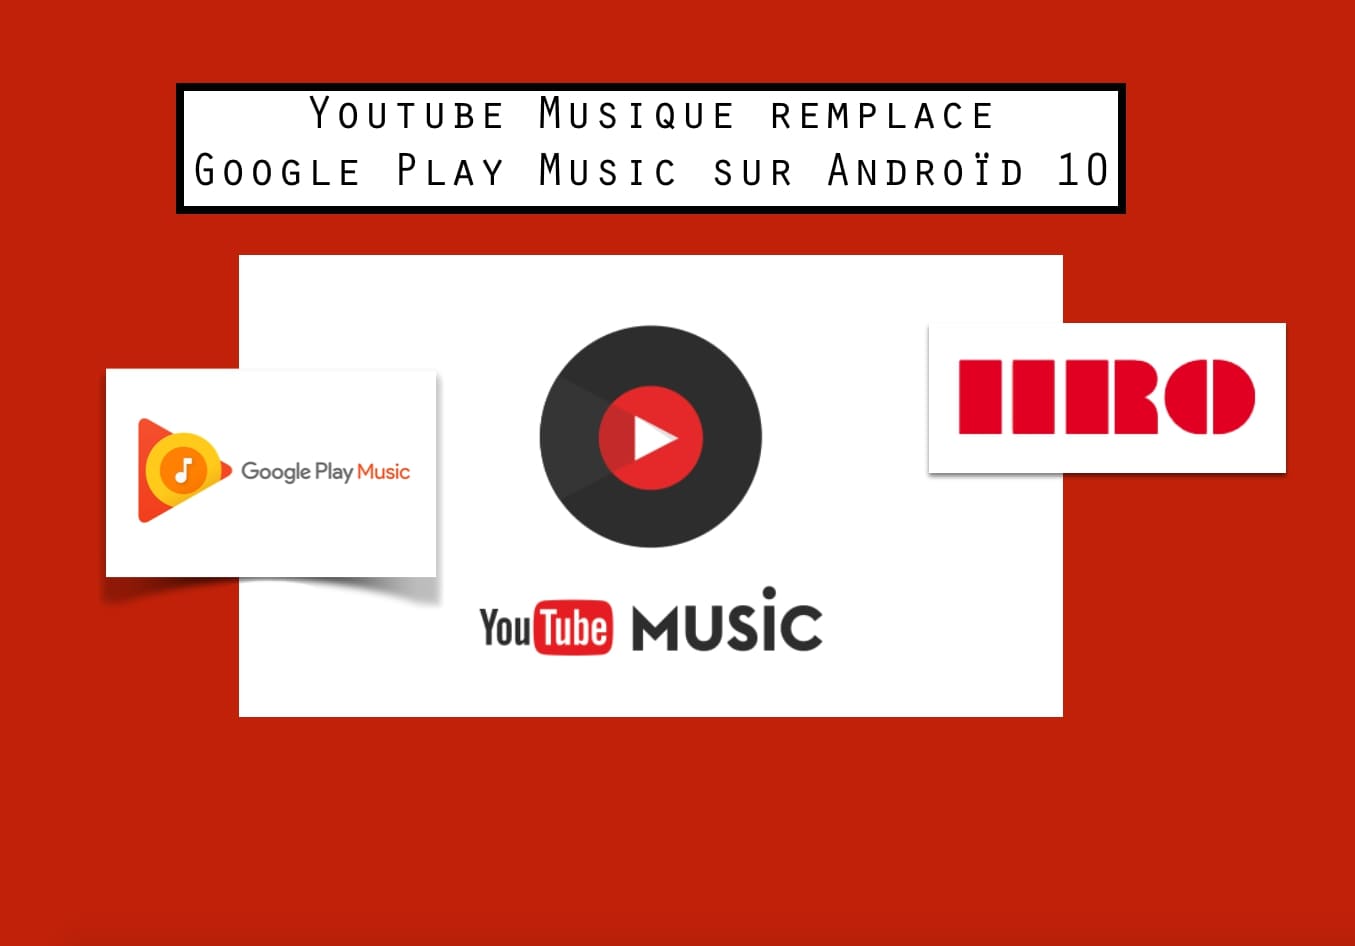 Youtube Musique remplace Google Play Music sur Androïd 10